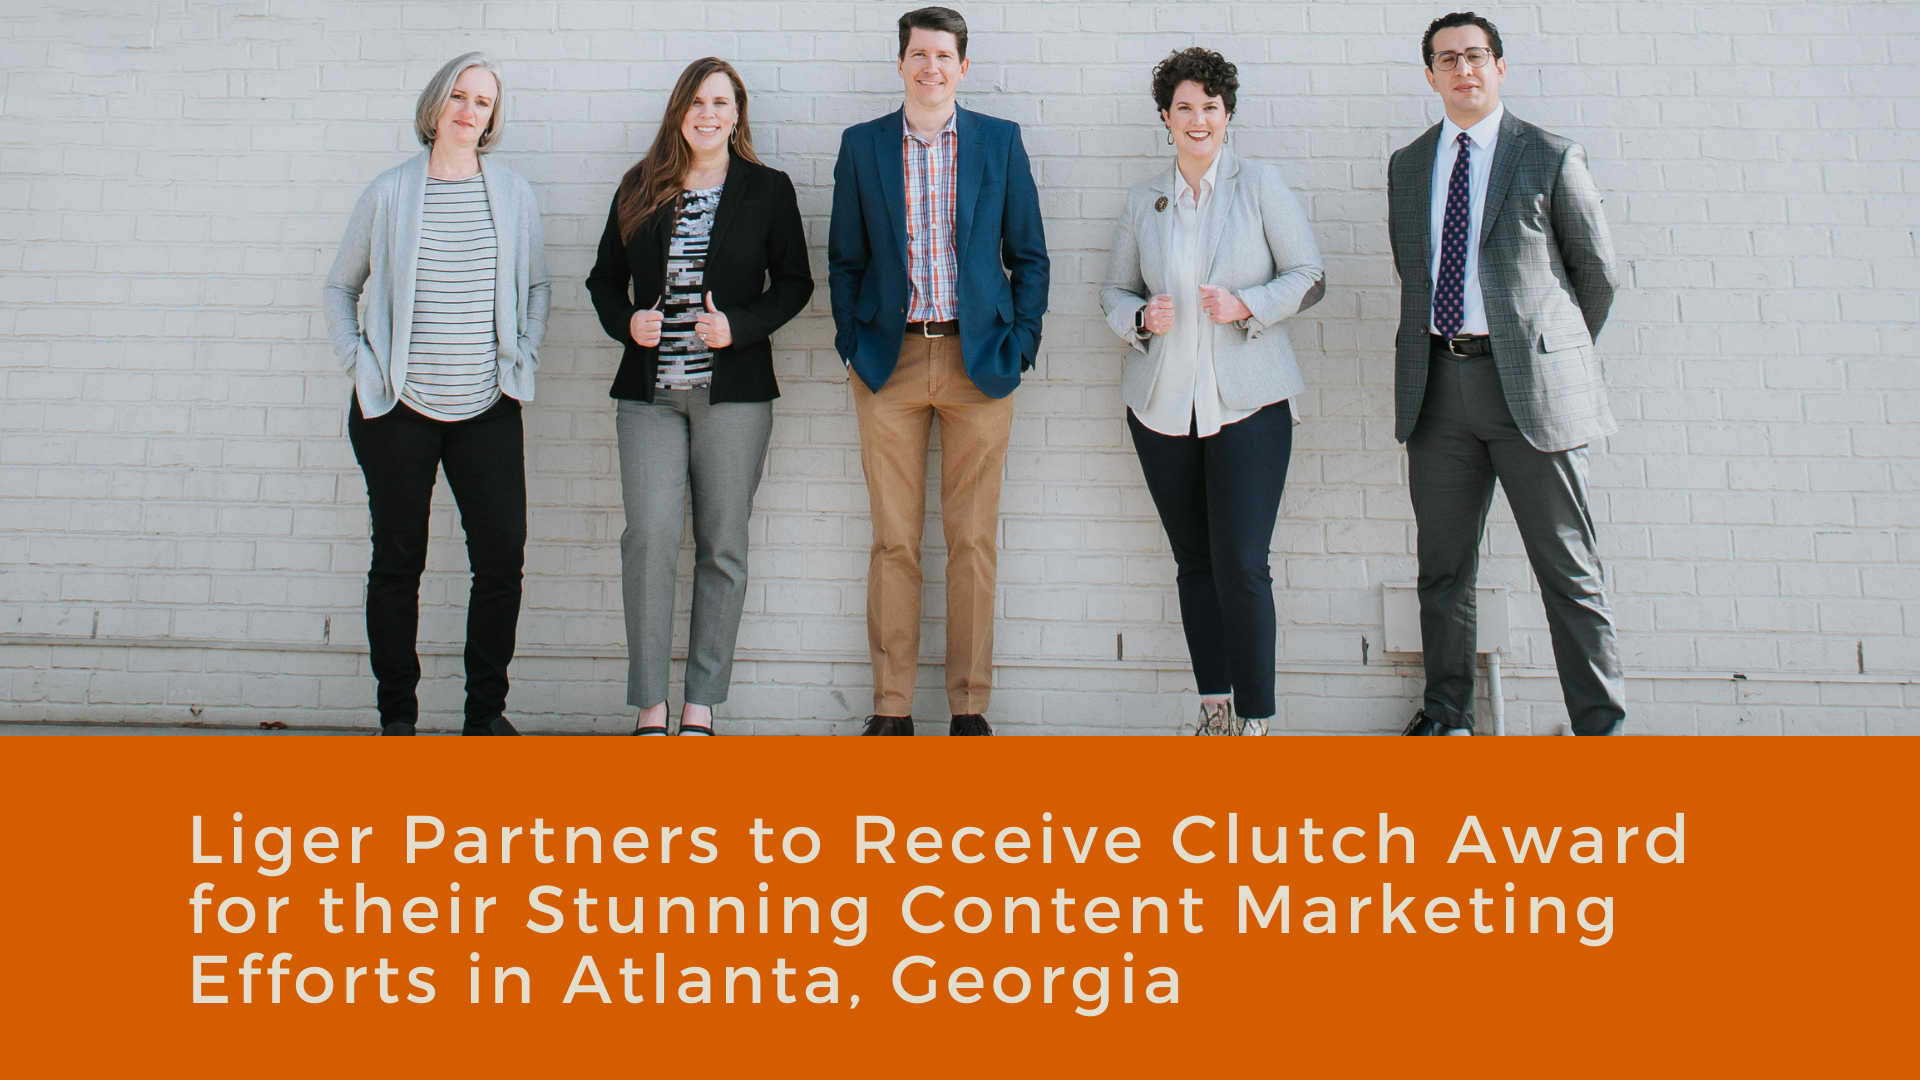 Liger Partners to Receive Clutch Award for their Stunning Content Marketing Efforts in Atlanta, Georgia